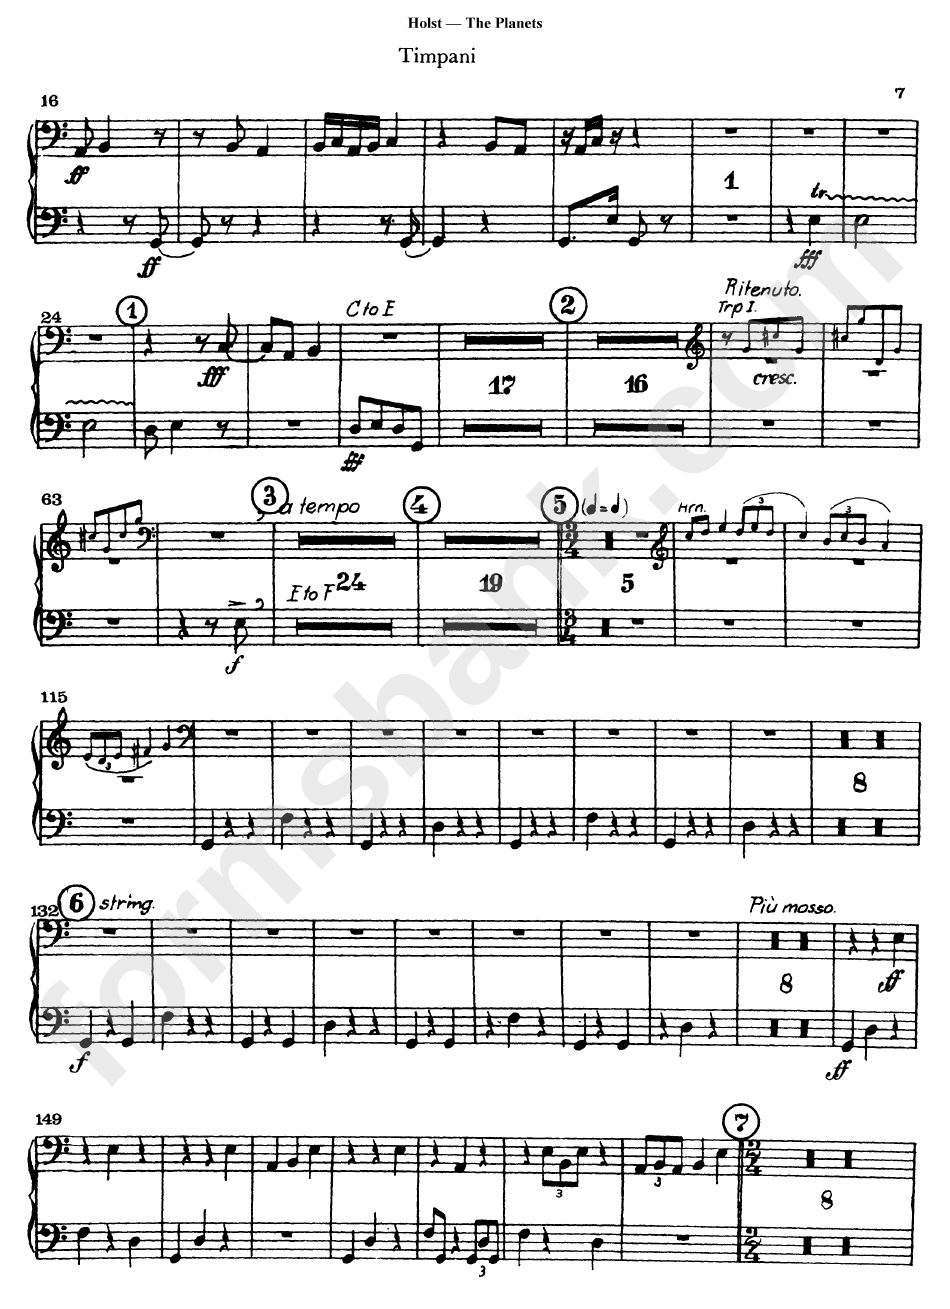 The Planets By Gustav Holst Piano Sheet Music